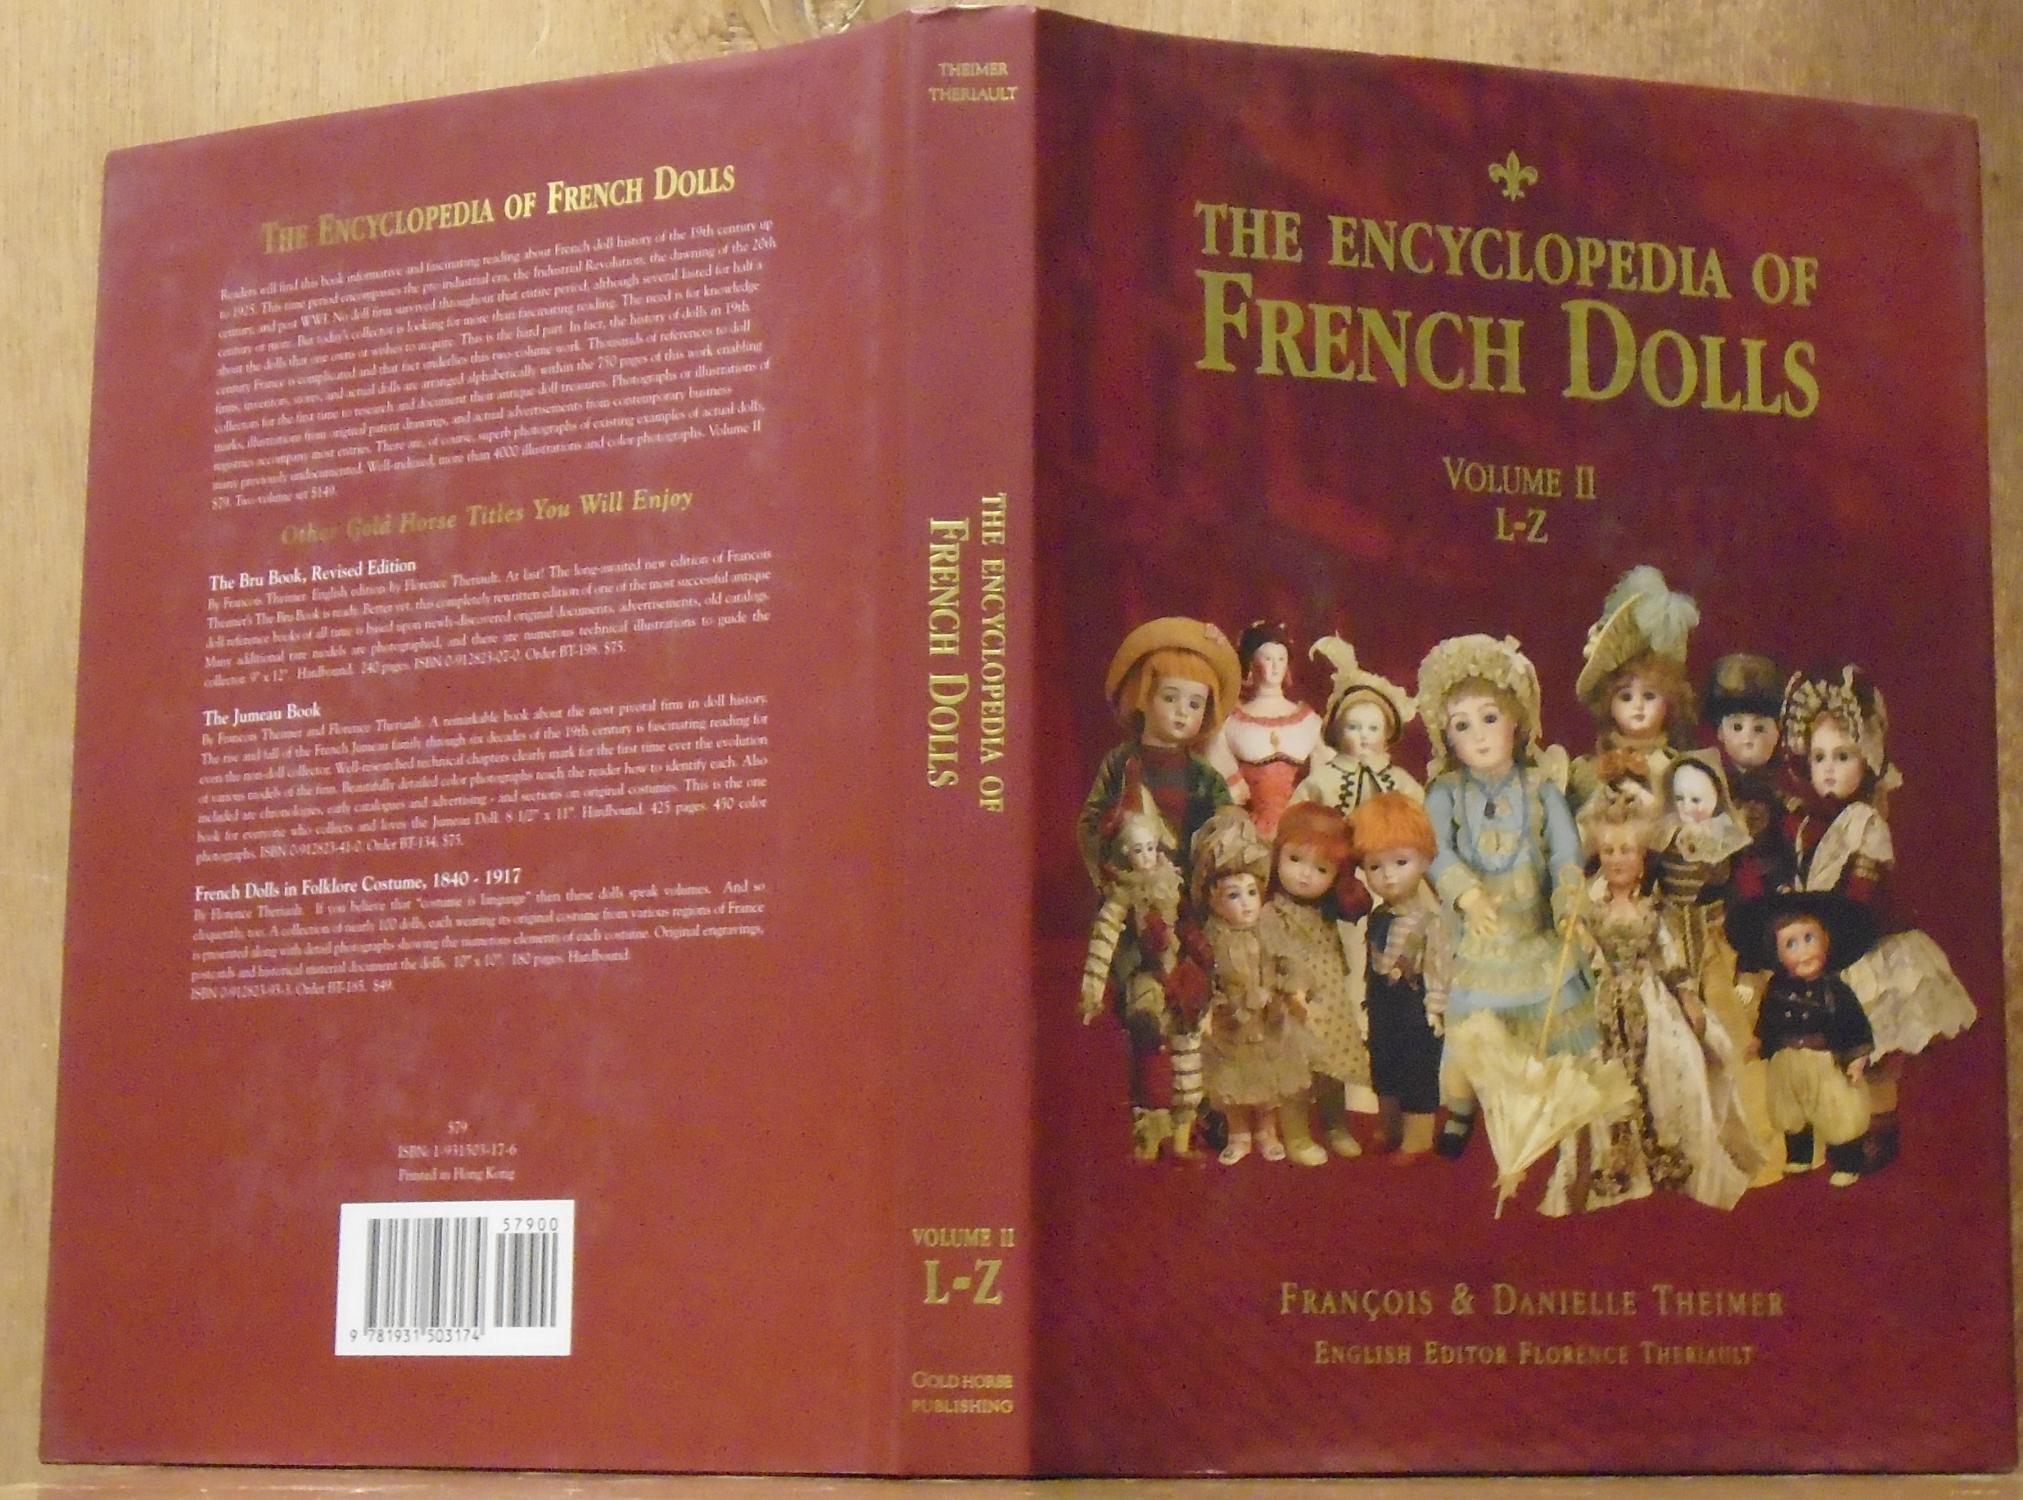 The Encyclopedia of French Dolls Volume II (2, Two): L-Z (SIGNED by Editor) - Francois and Danielle; English Editor: Florence Theriault